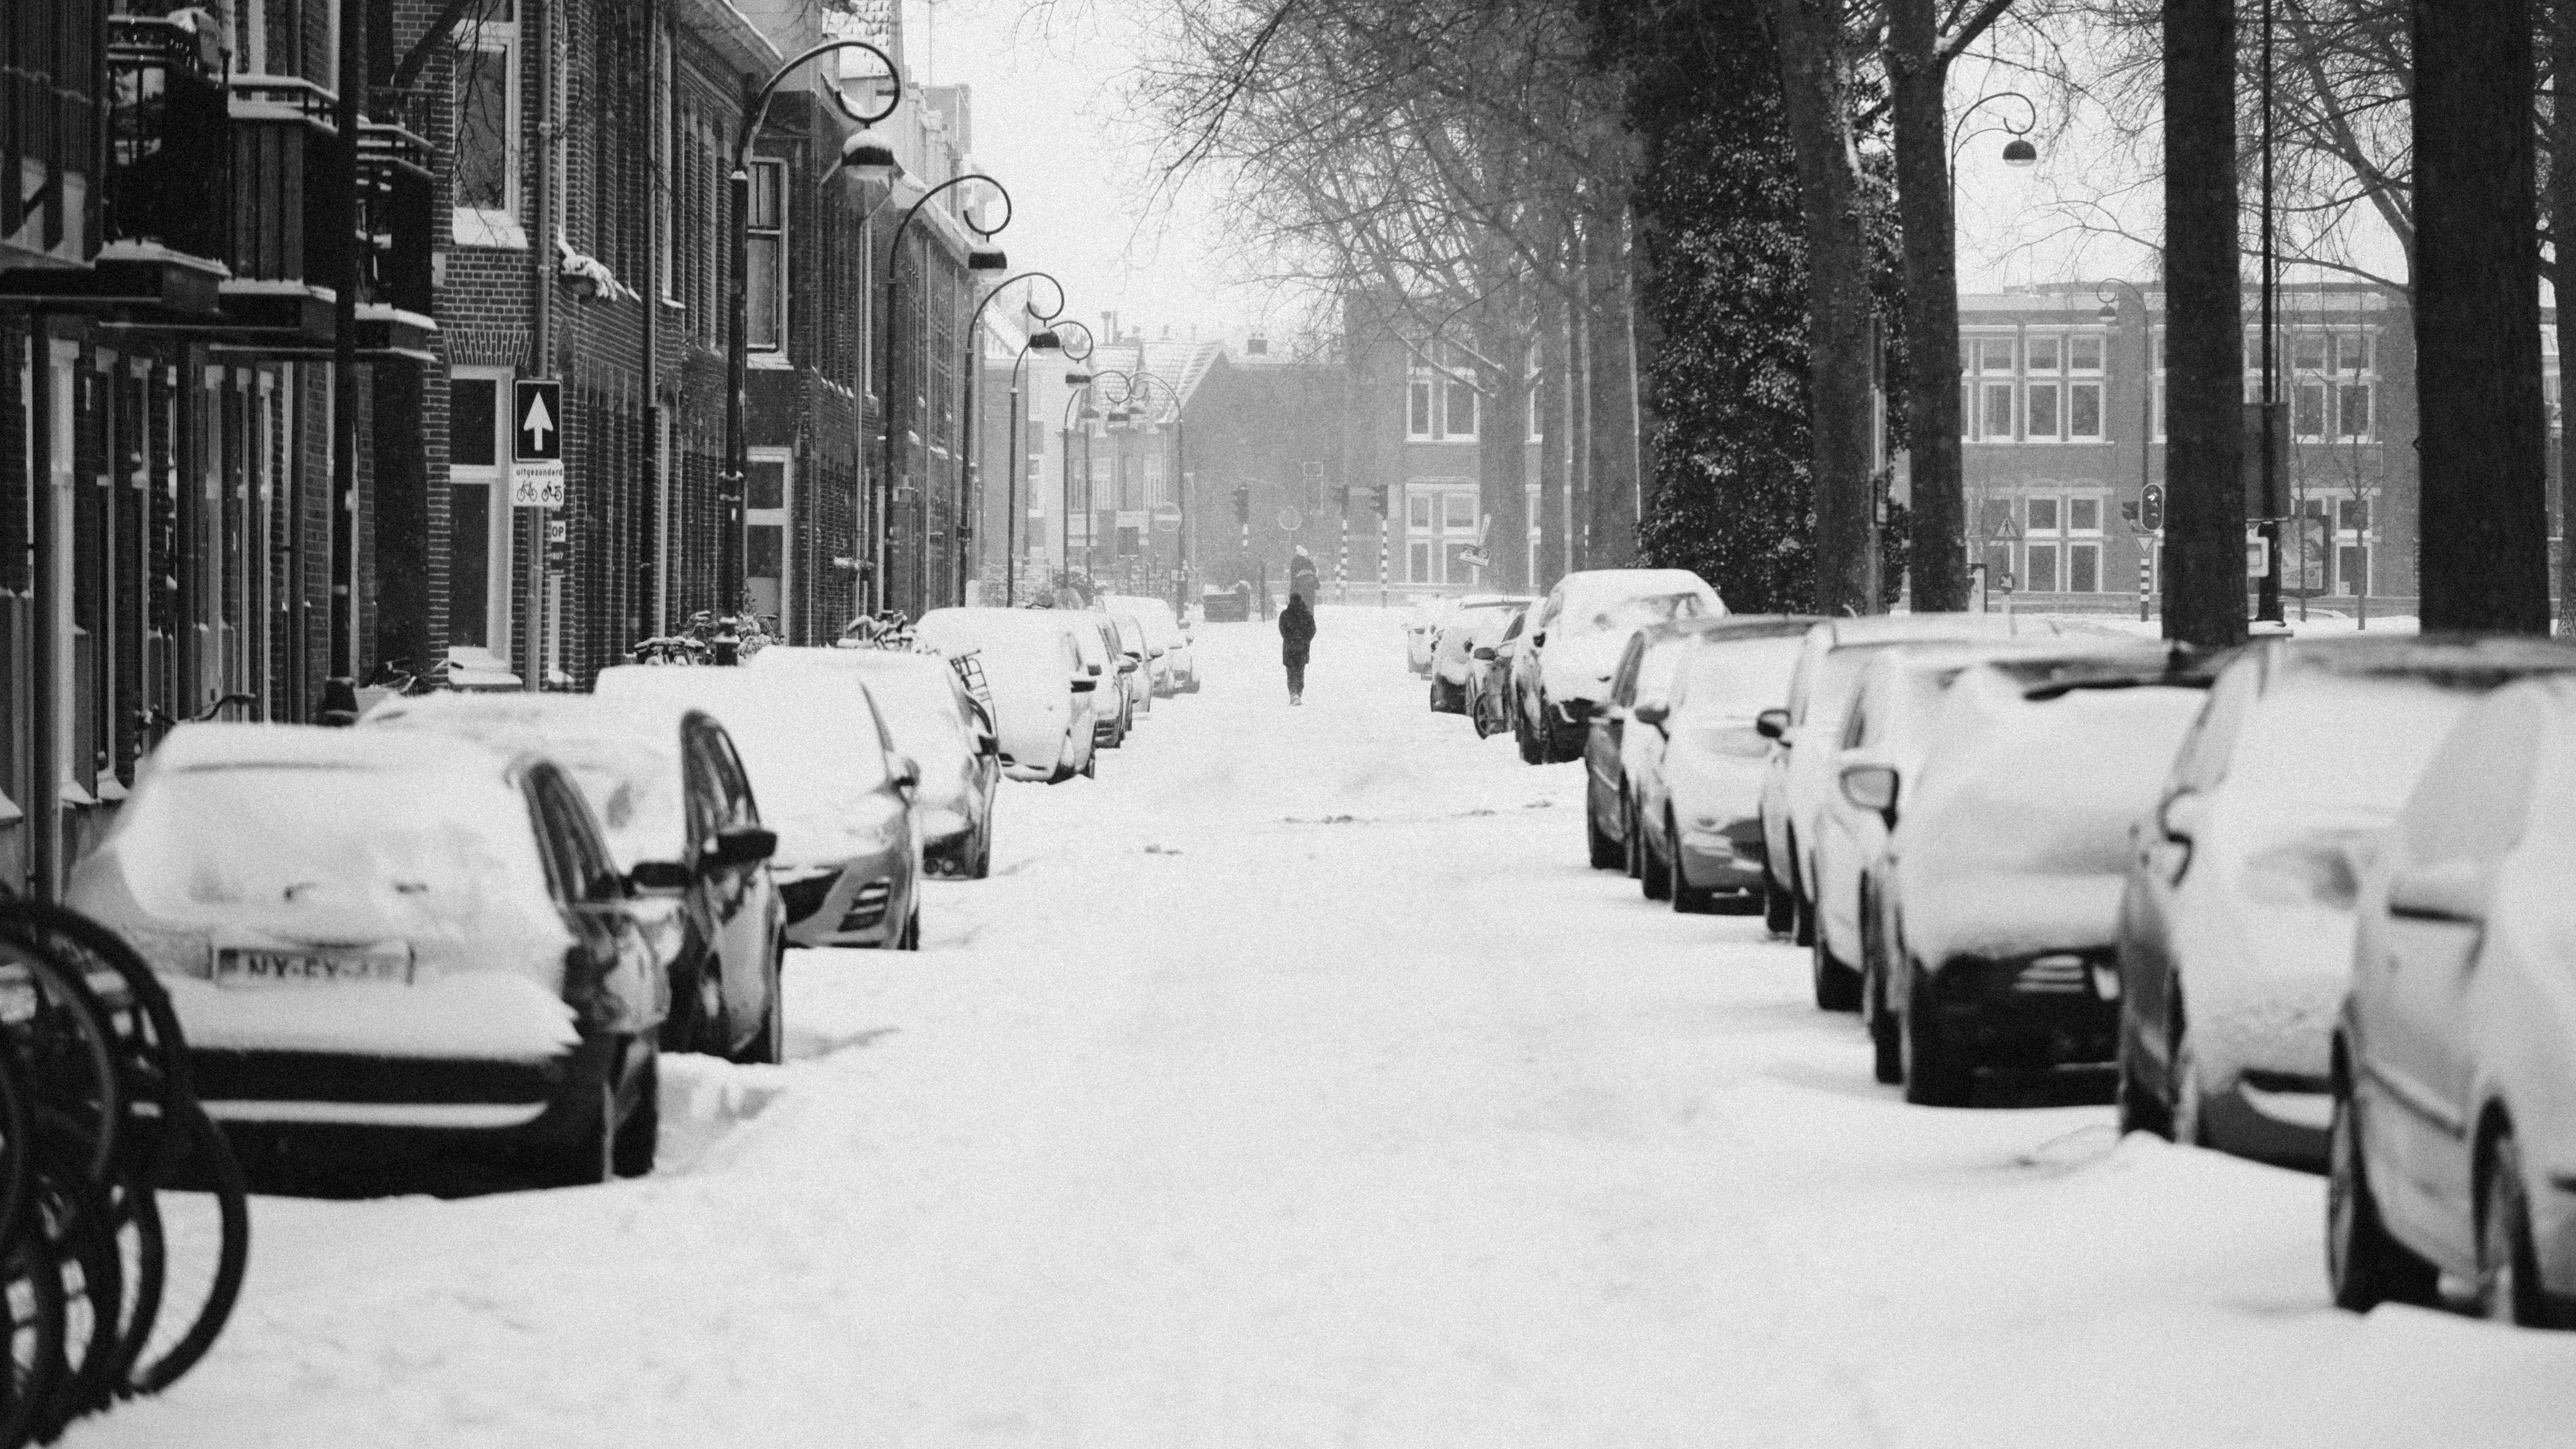 A snow-covered city street with a single figure in the distance.